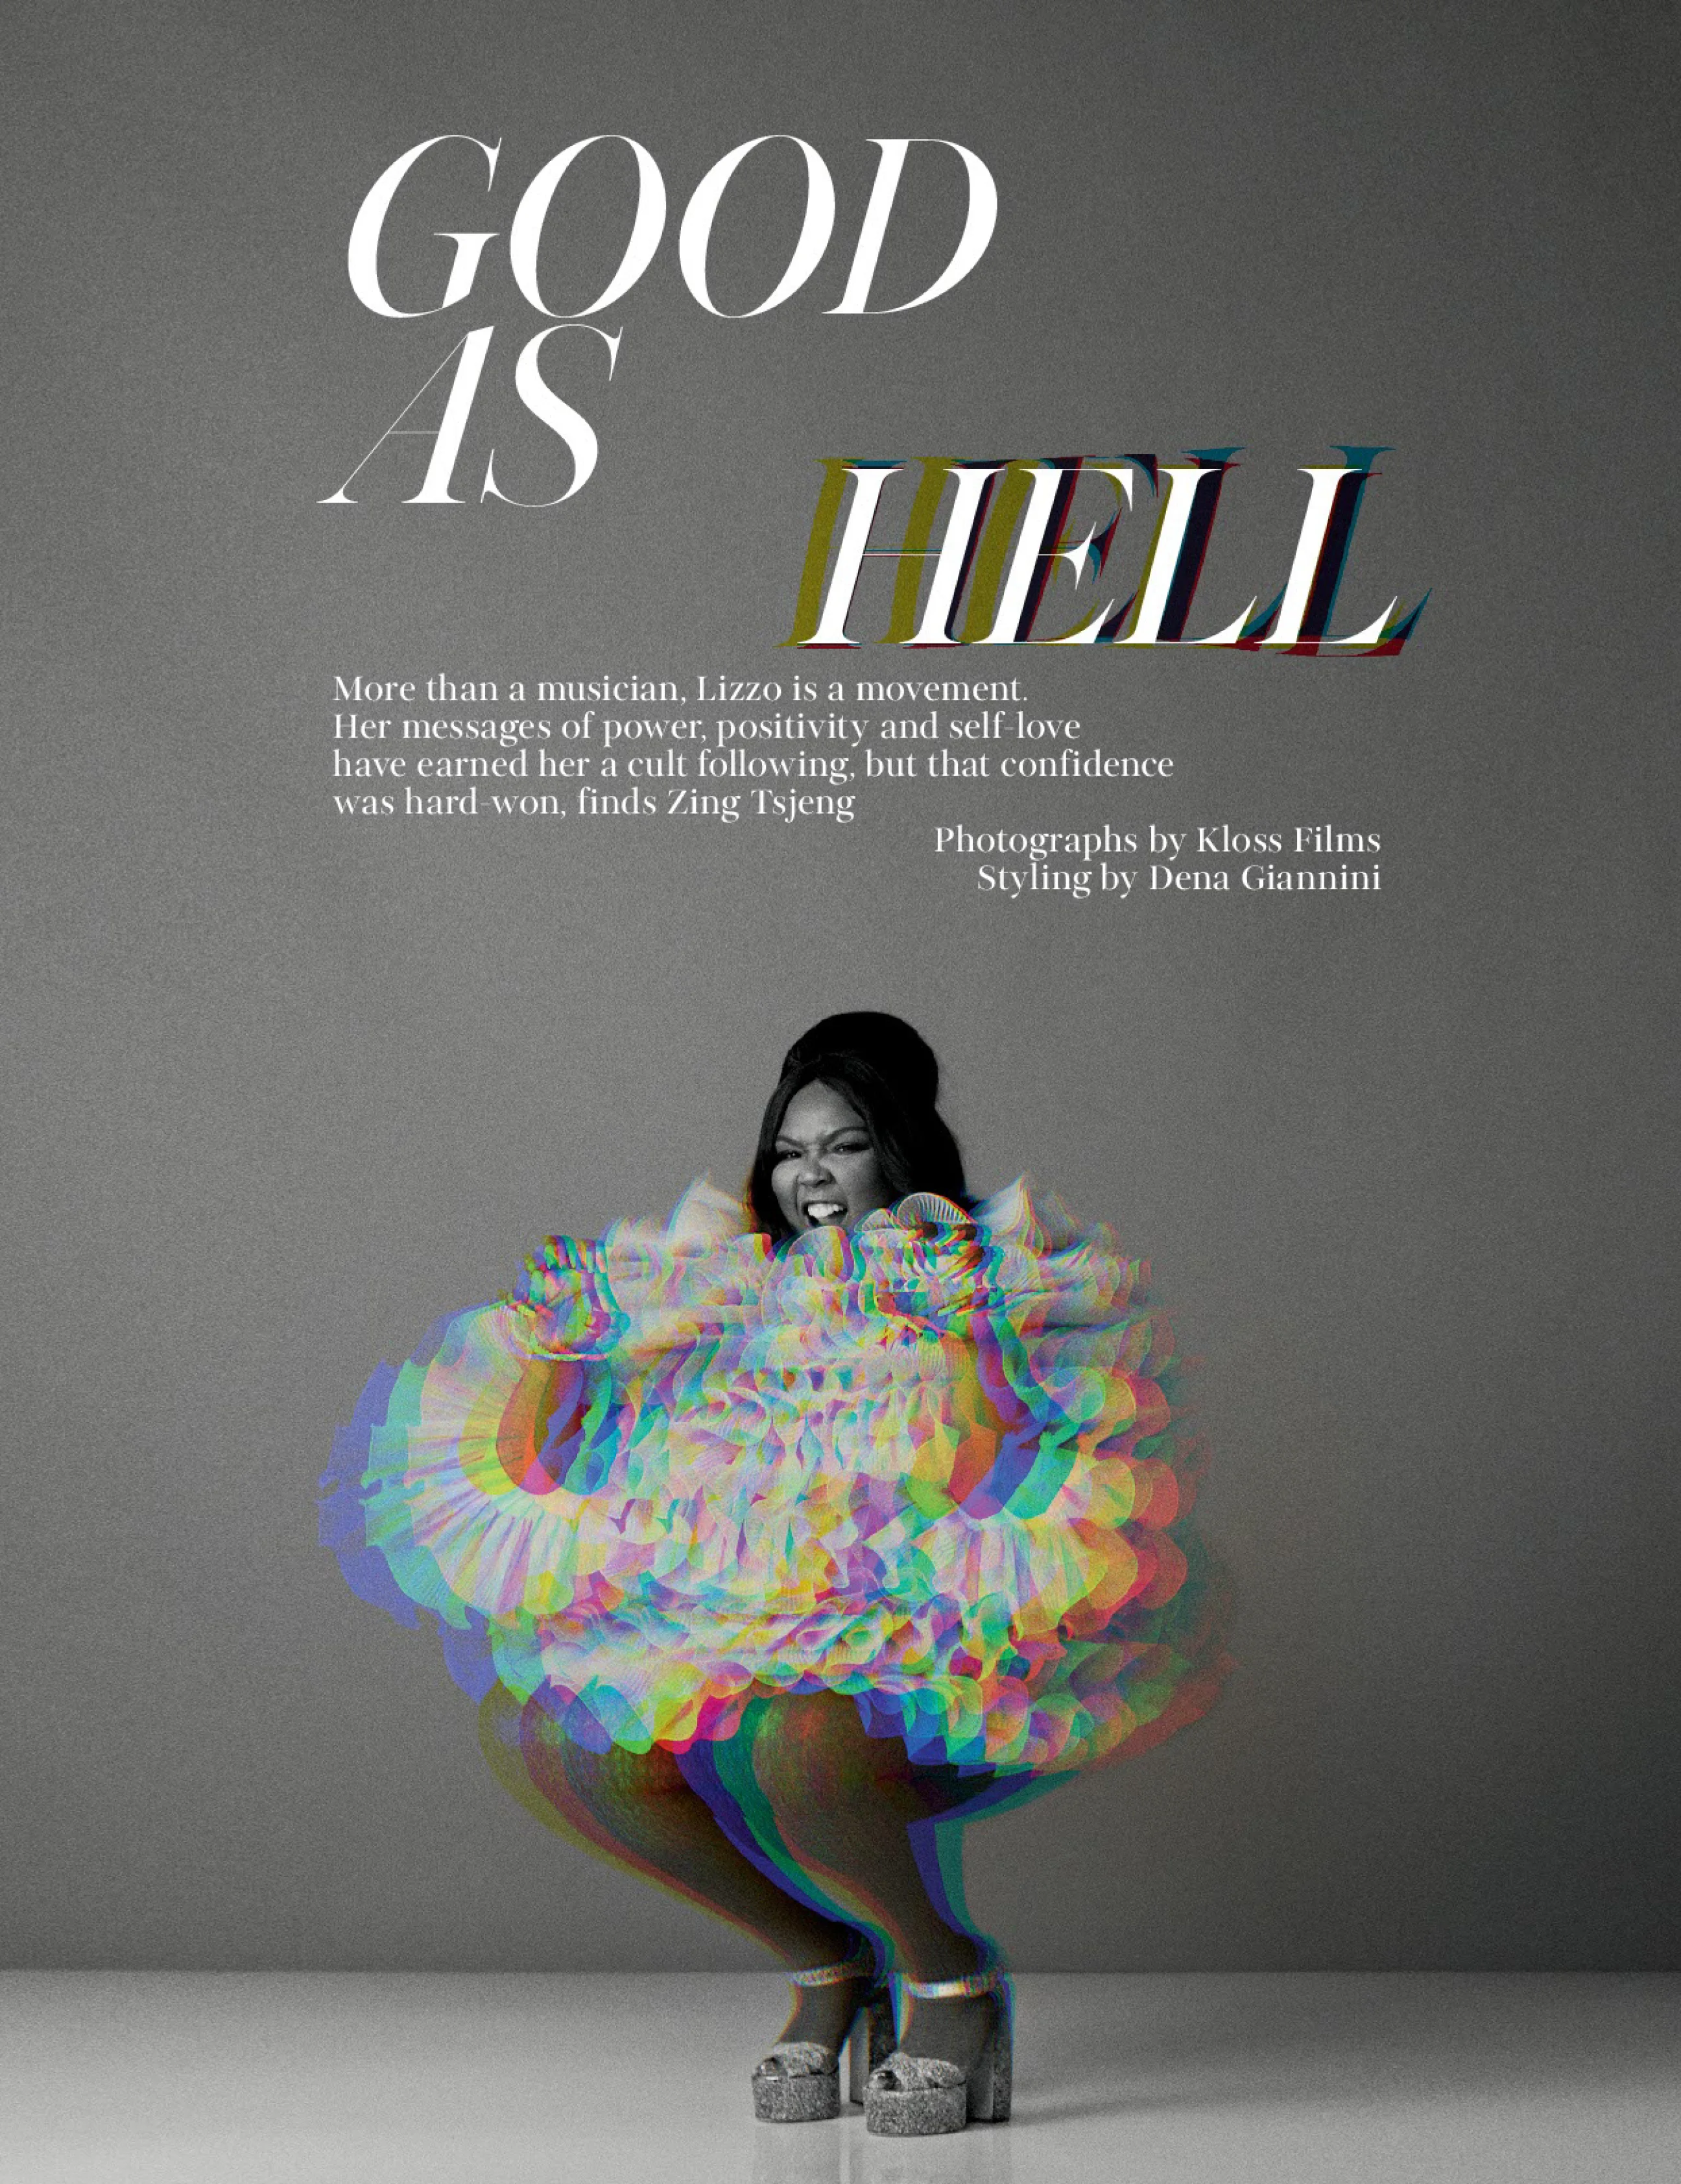 bv-lizzo-inside-good-as-hell-1